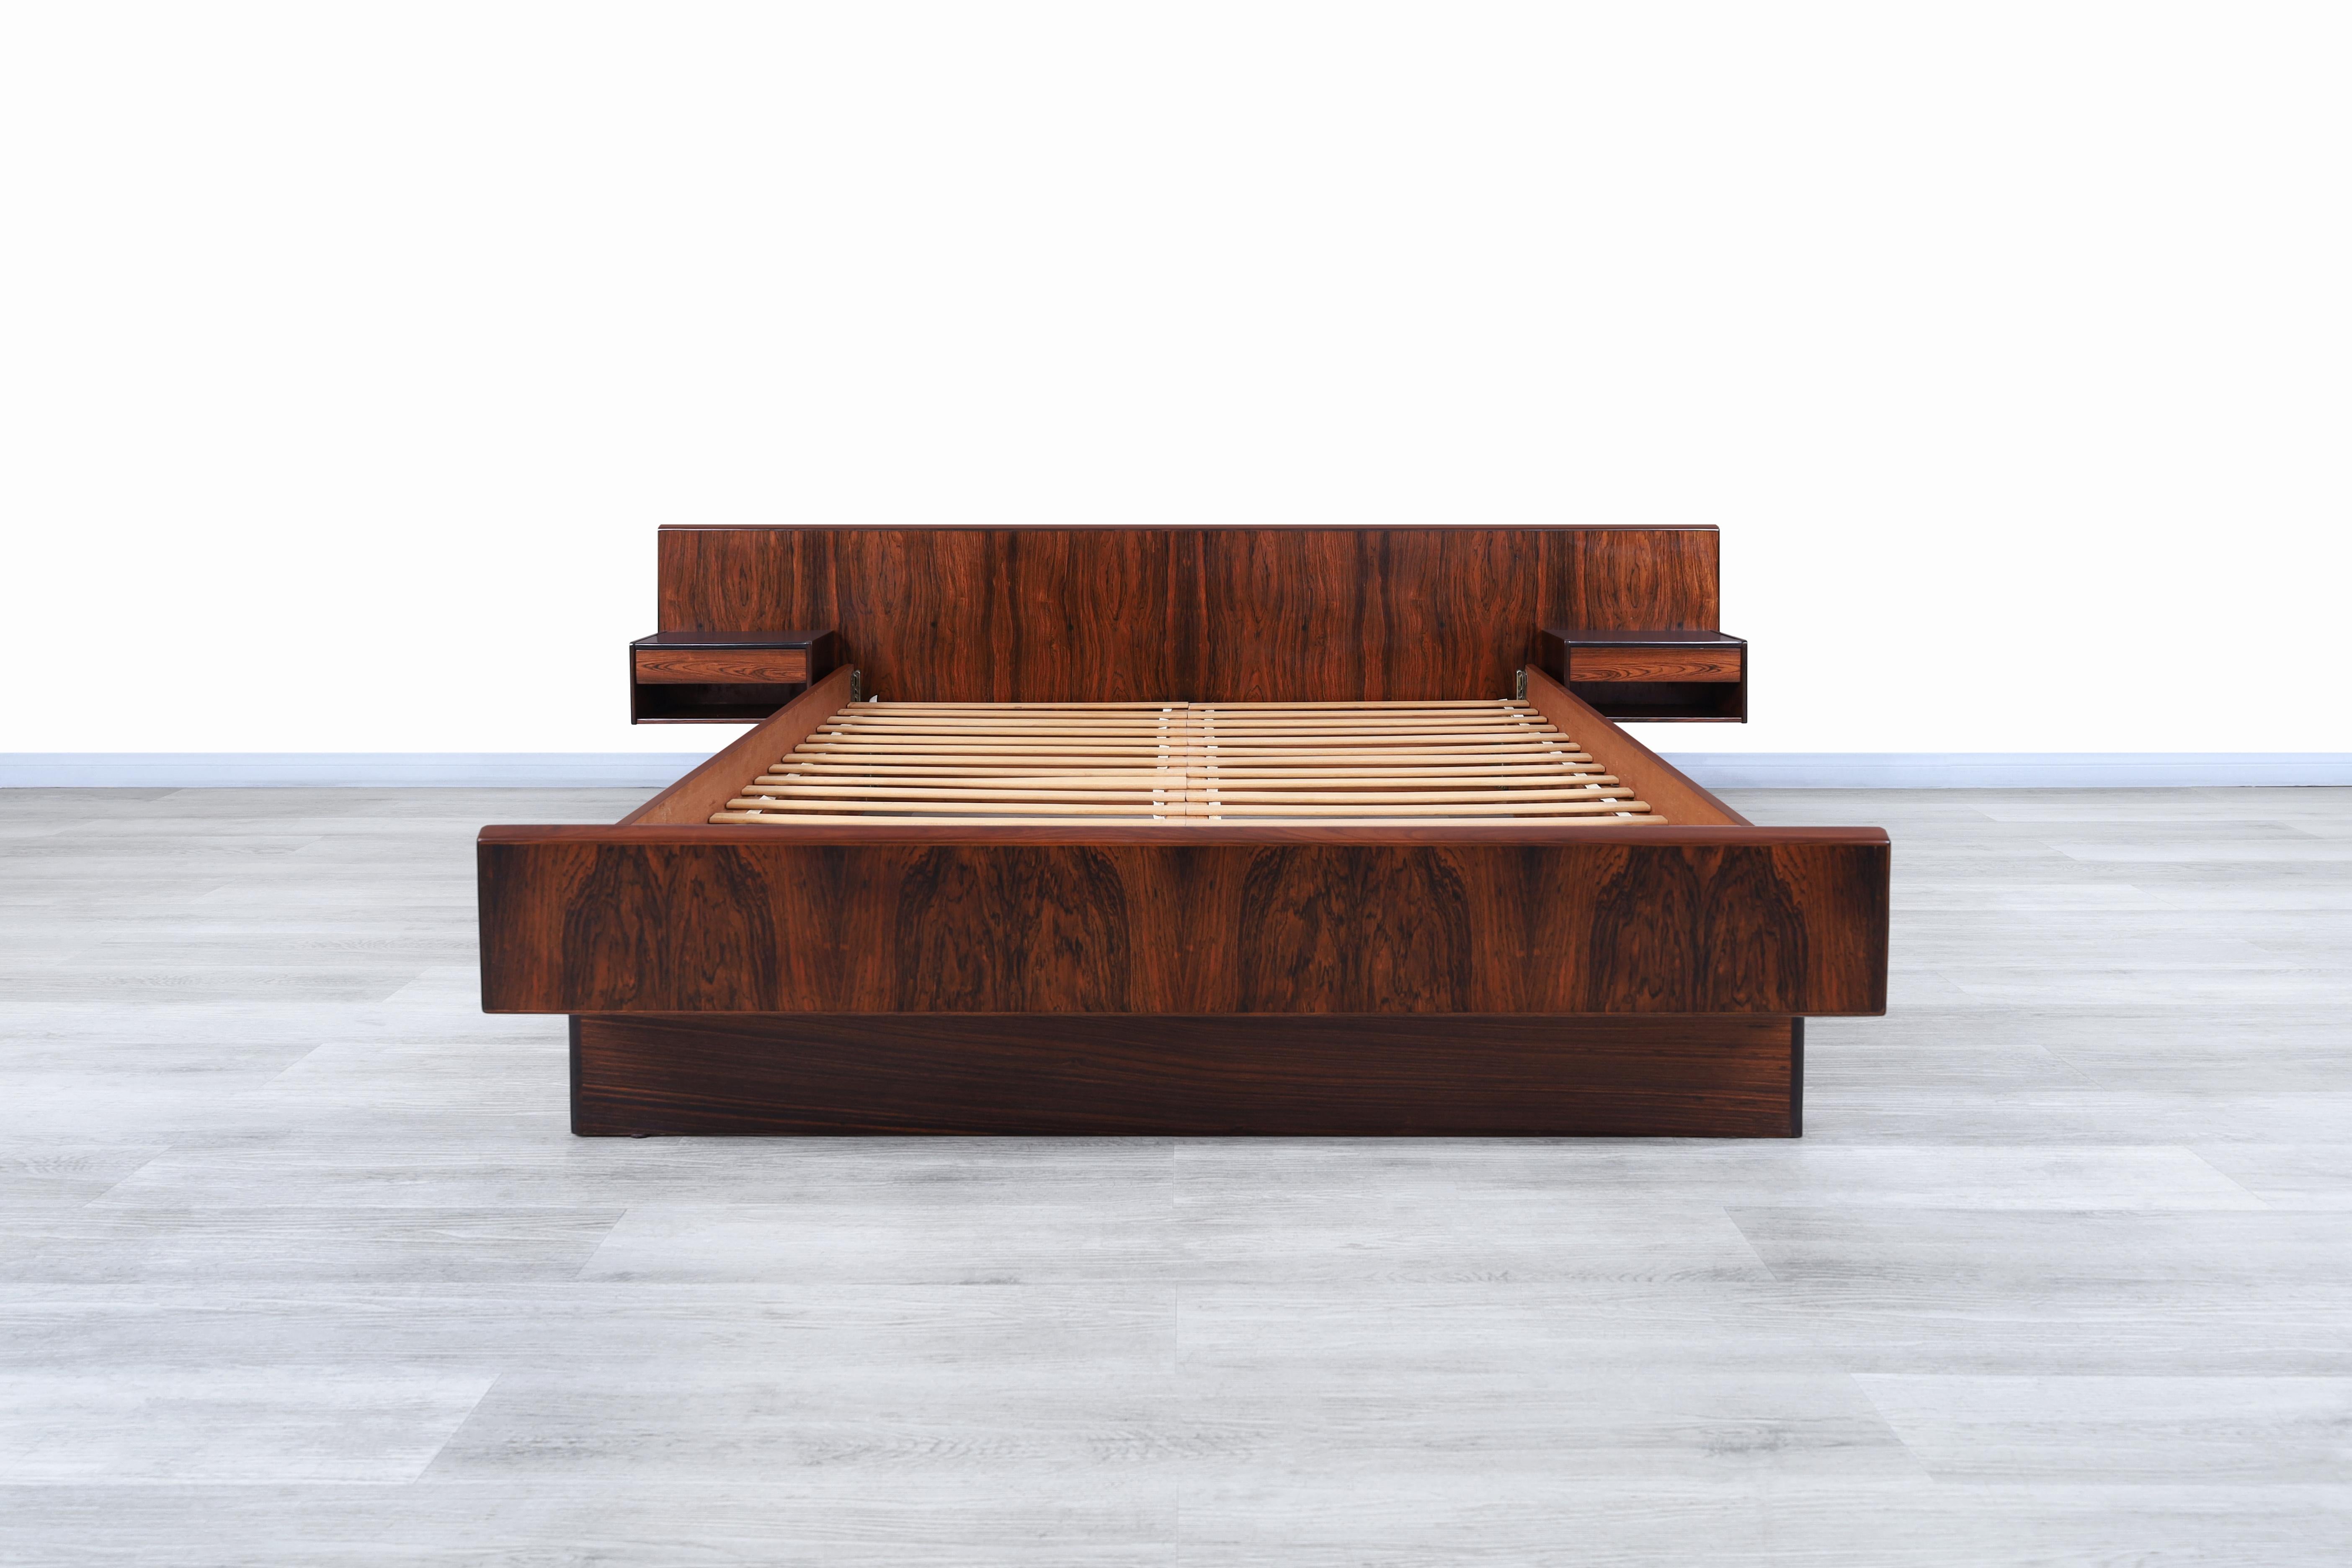 Wonderful Danish modern rosewood queen bed designed and manufactured by Sannemanns Møbelfabrik K/S in Denmark, circa 1970s. This bed features an elegant design that stands out for the fine attention to detail and the Brazilian rosewood used in its